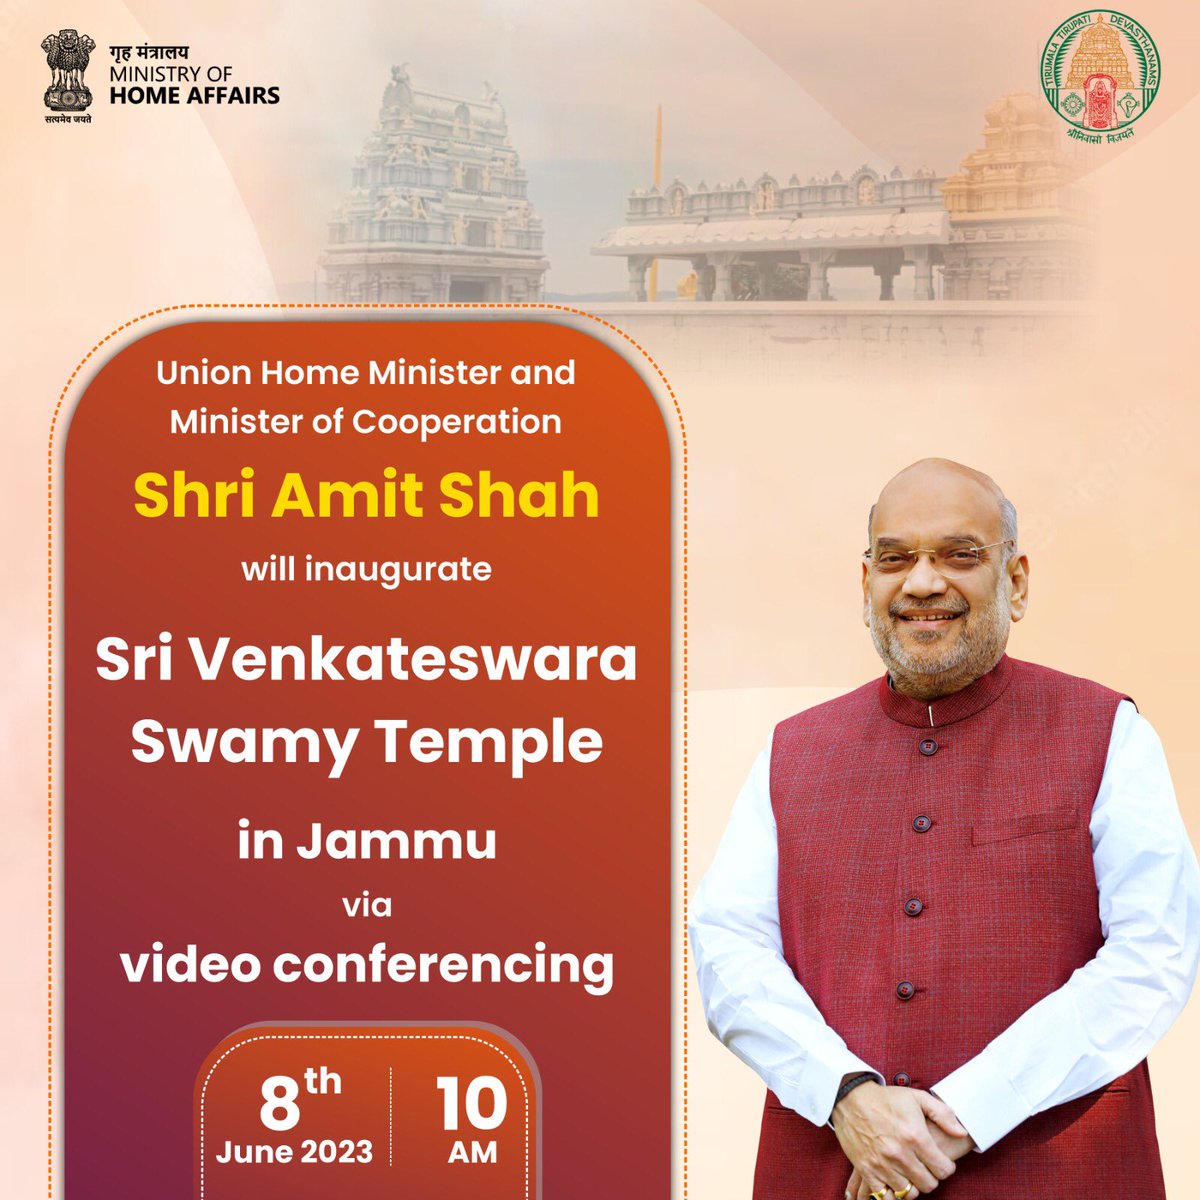 Union  Home Minister and Minister of Cooperation Shri @AmitShah will inaugurate 'Sri Venkateswara Swamy temple' in Jammu, tomorrow at 10 AM via video conference.